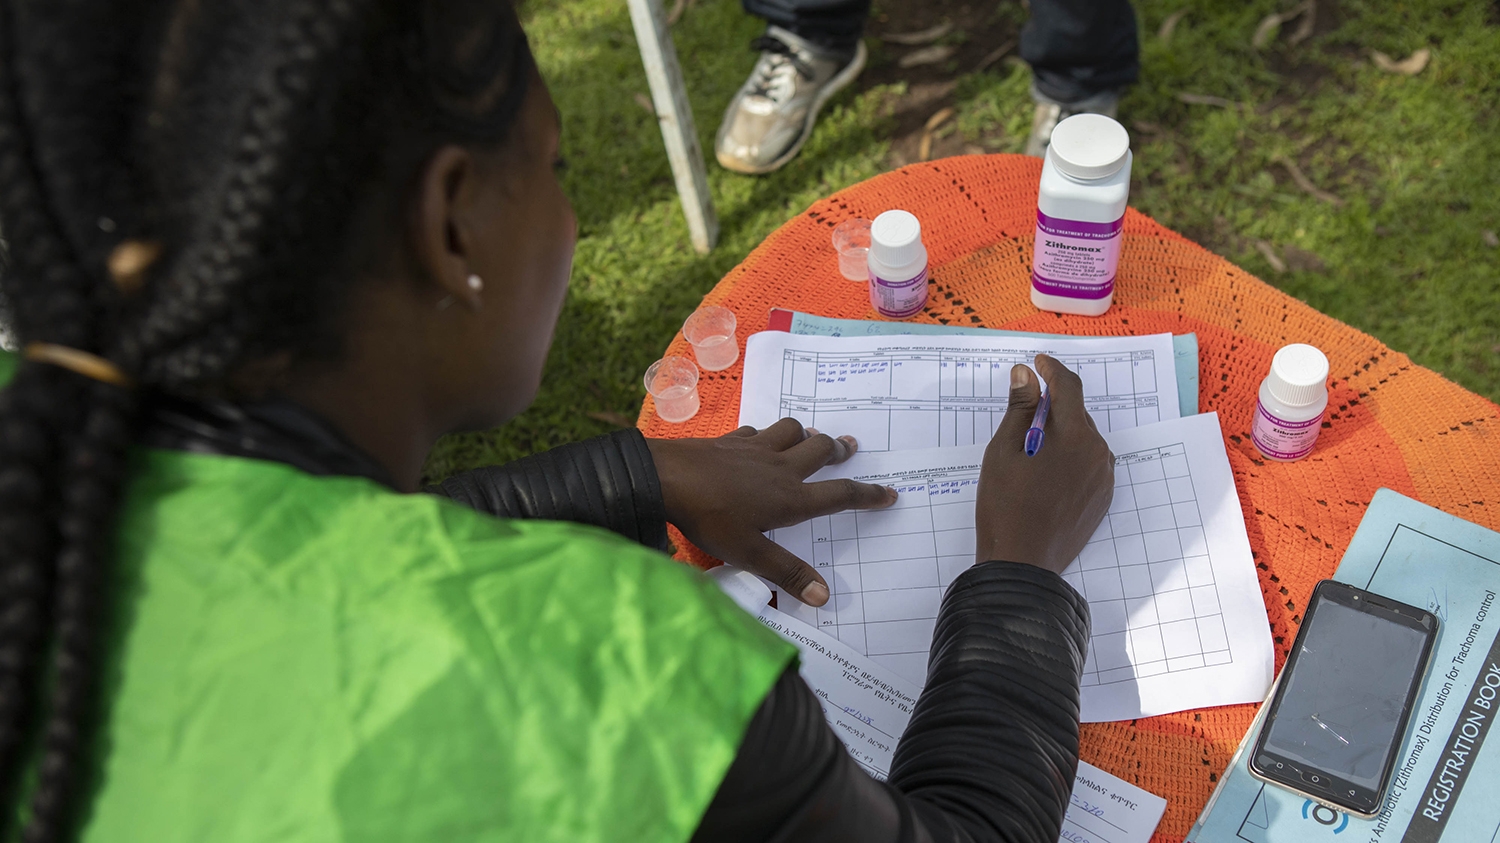 A community health worker completes official documentation during an MDA for trachoma in Ethiopia.